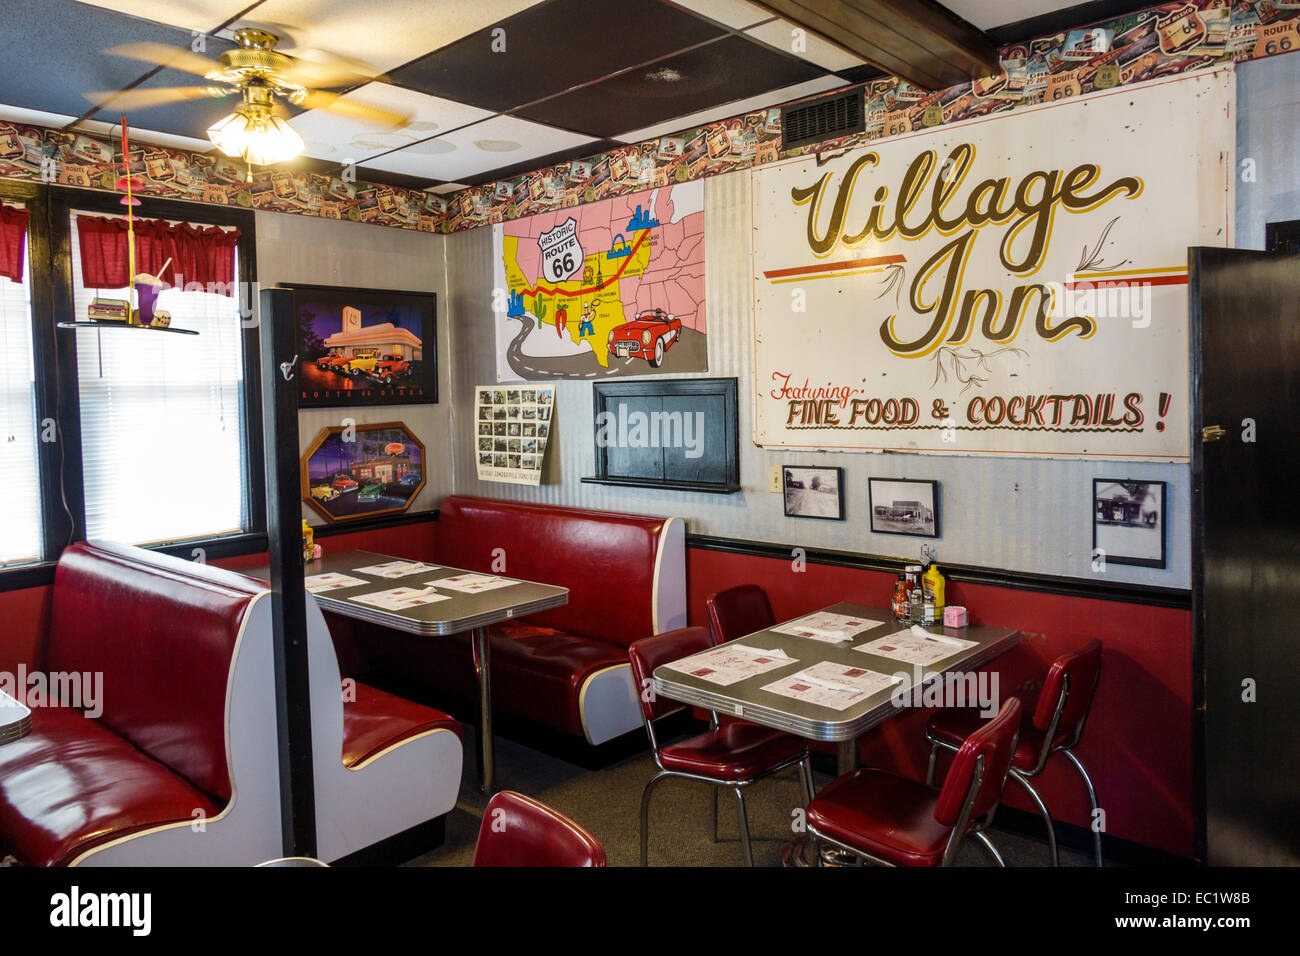 Illinois Hamel,historic highway Route 66,Weezy's,restaurant restaurants food dining cafe cafes,interior inside,booths,decor,Americana,IL140902029 Stock Photo